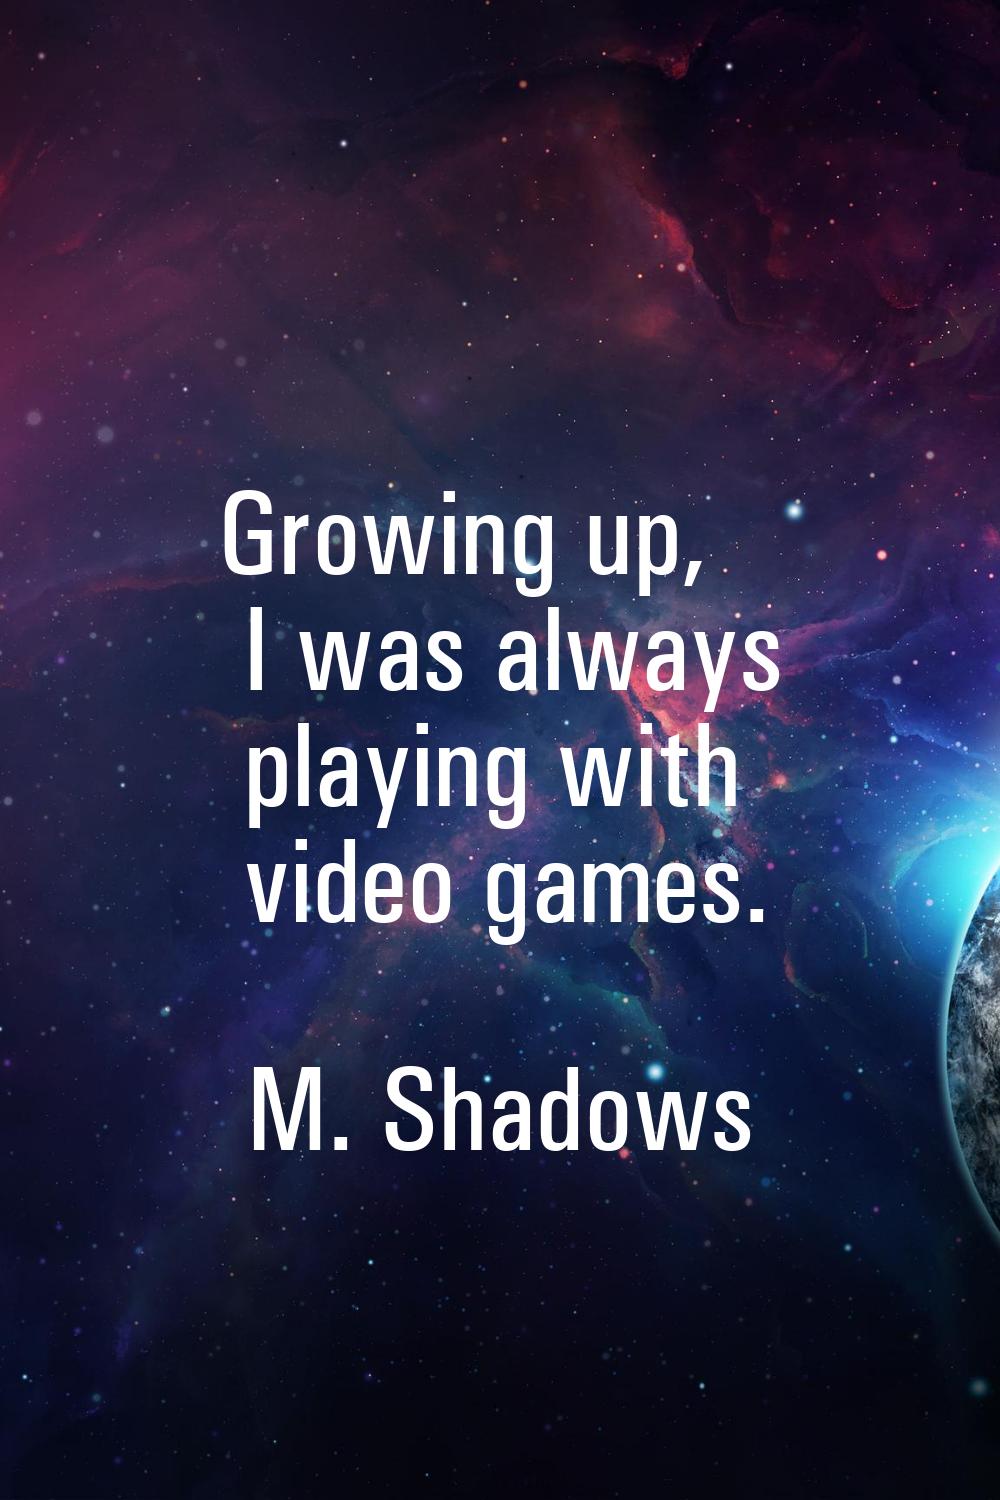 Growing up, I was always playing with video games.